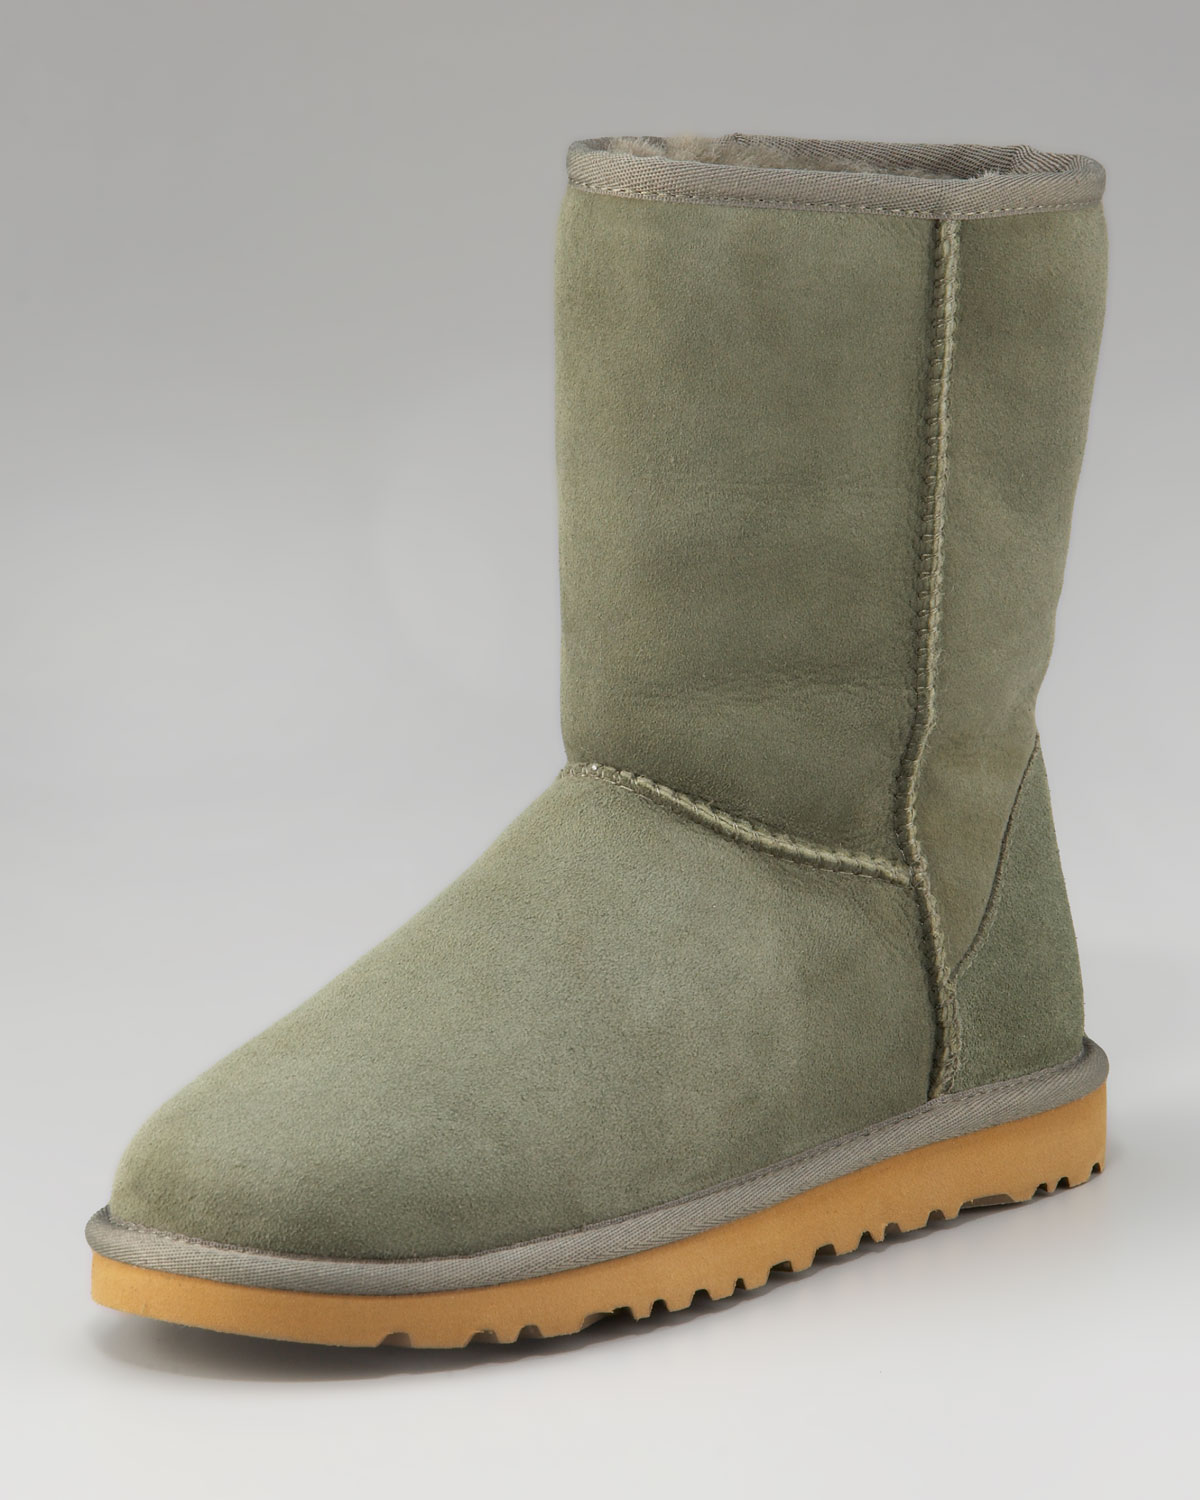 Lyst - UGG Classic Short Shearling Boot in Green